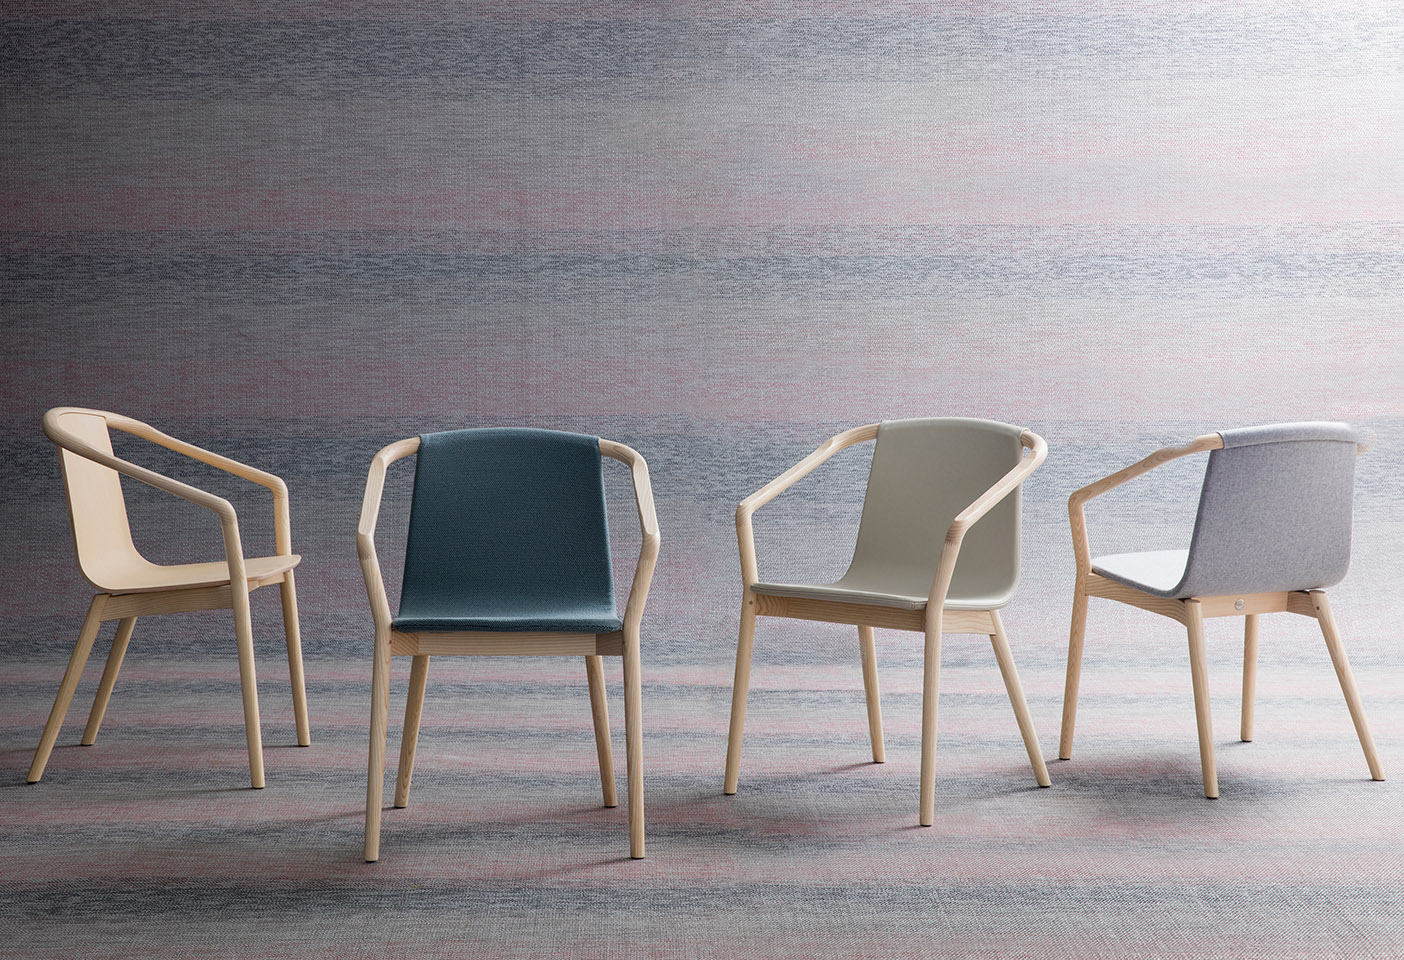 Thomas Chair by Metrica for SP01. Photo c/o SP01. 